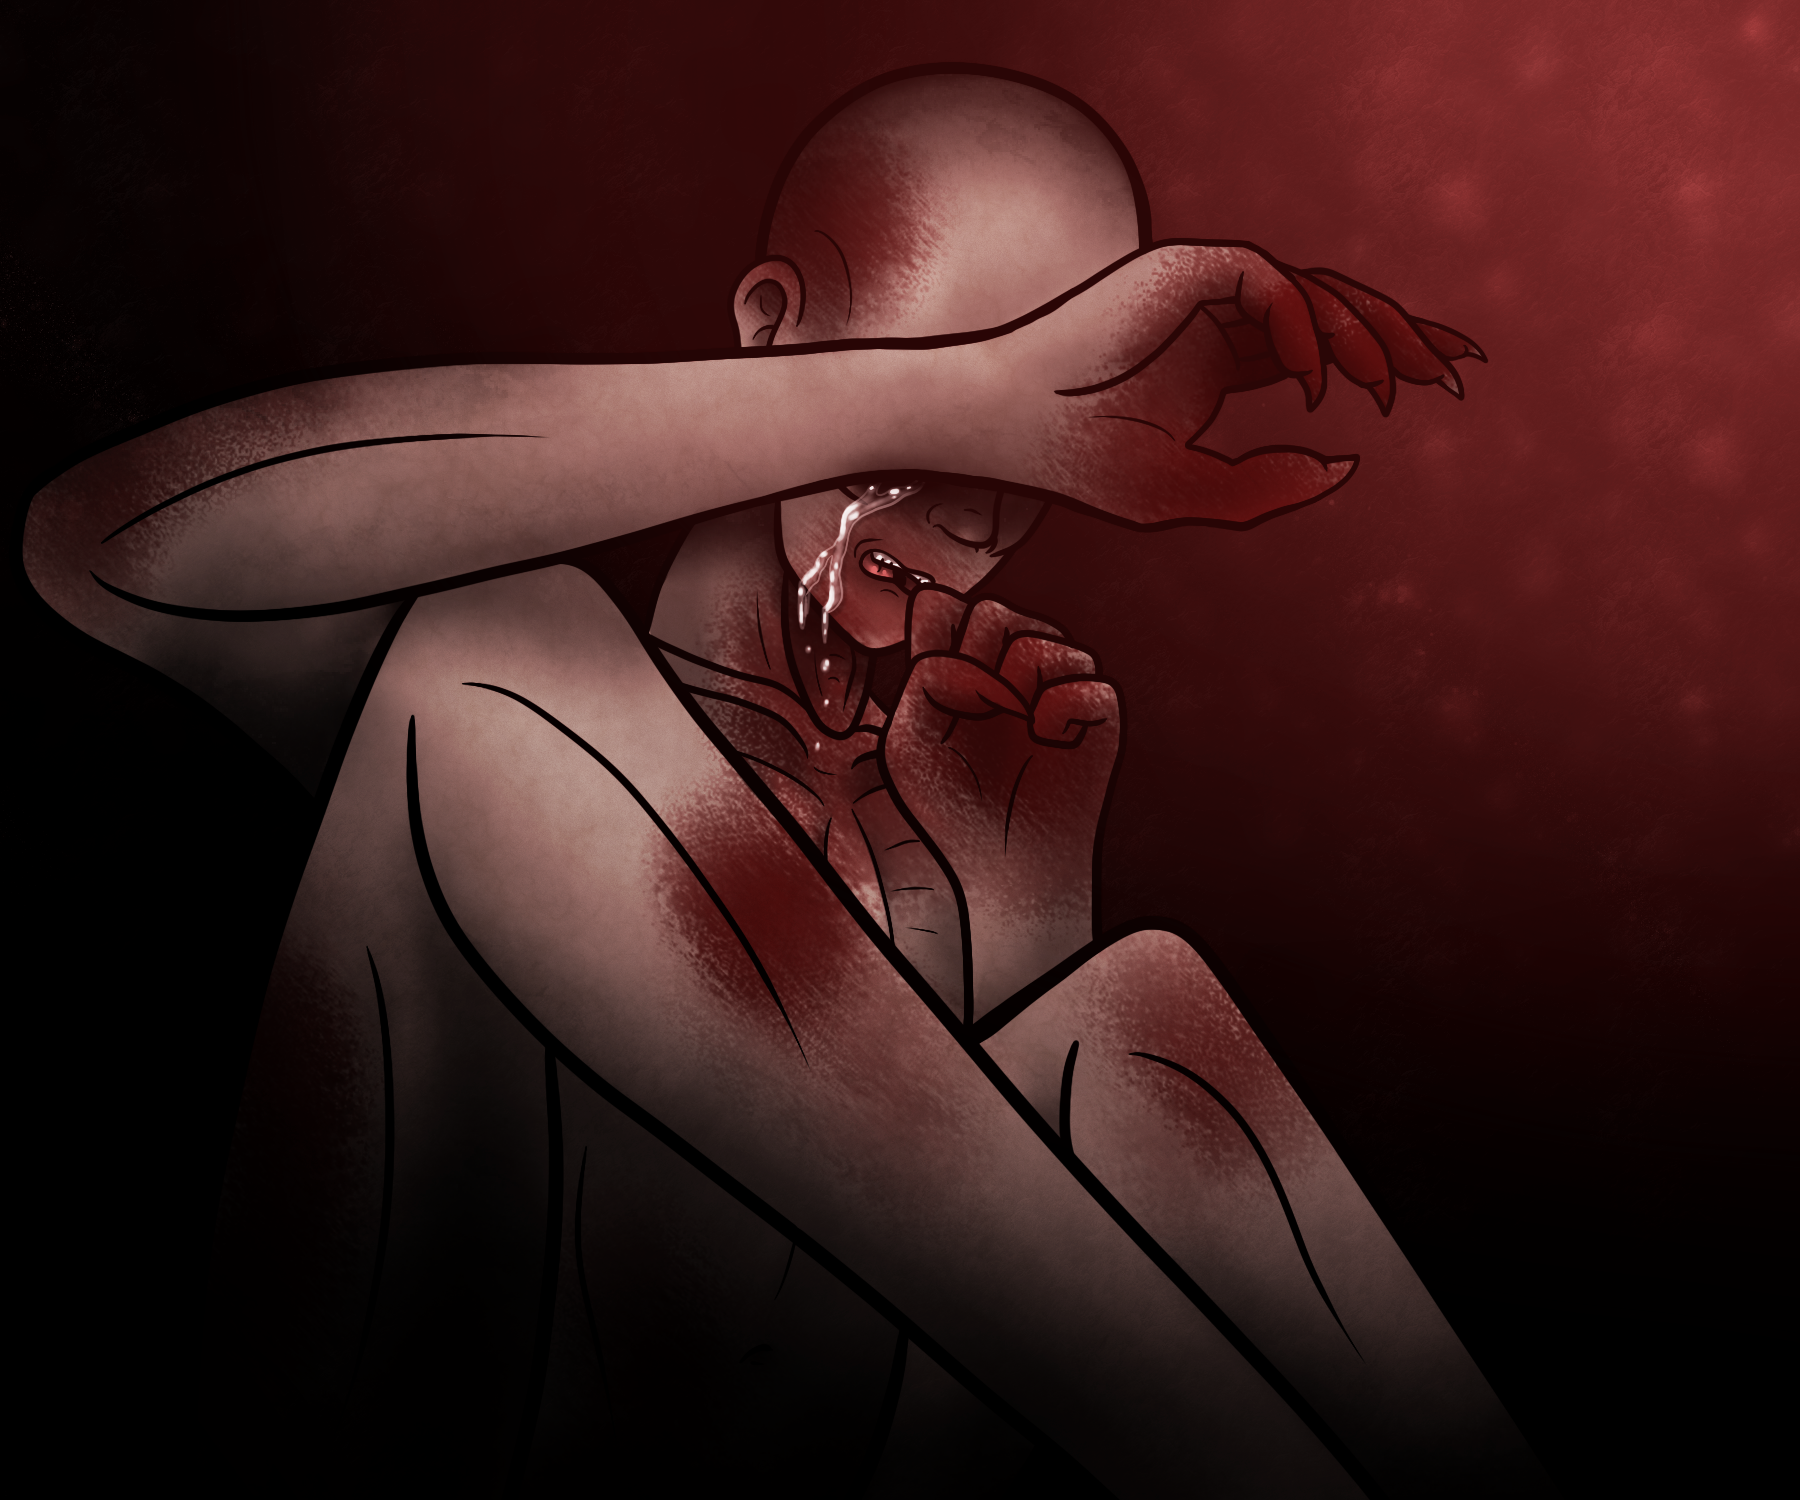 What you SHOULDN'T do to SCP-049 by AgentKulu on DeviantArt